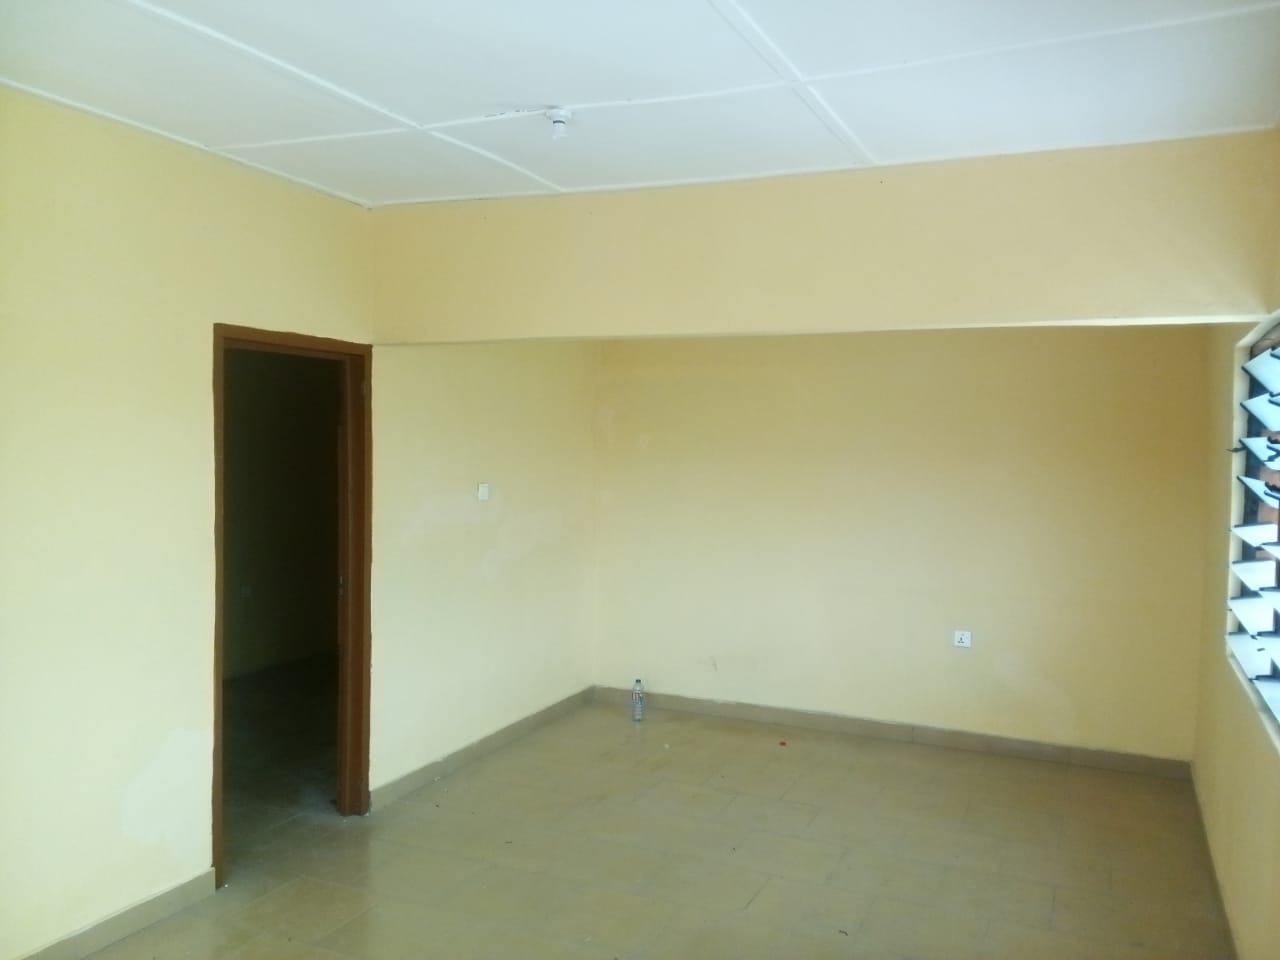 2 Bedrooms House for Rent at Achimota